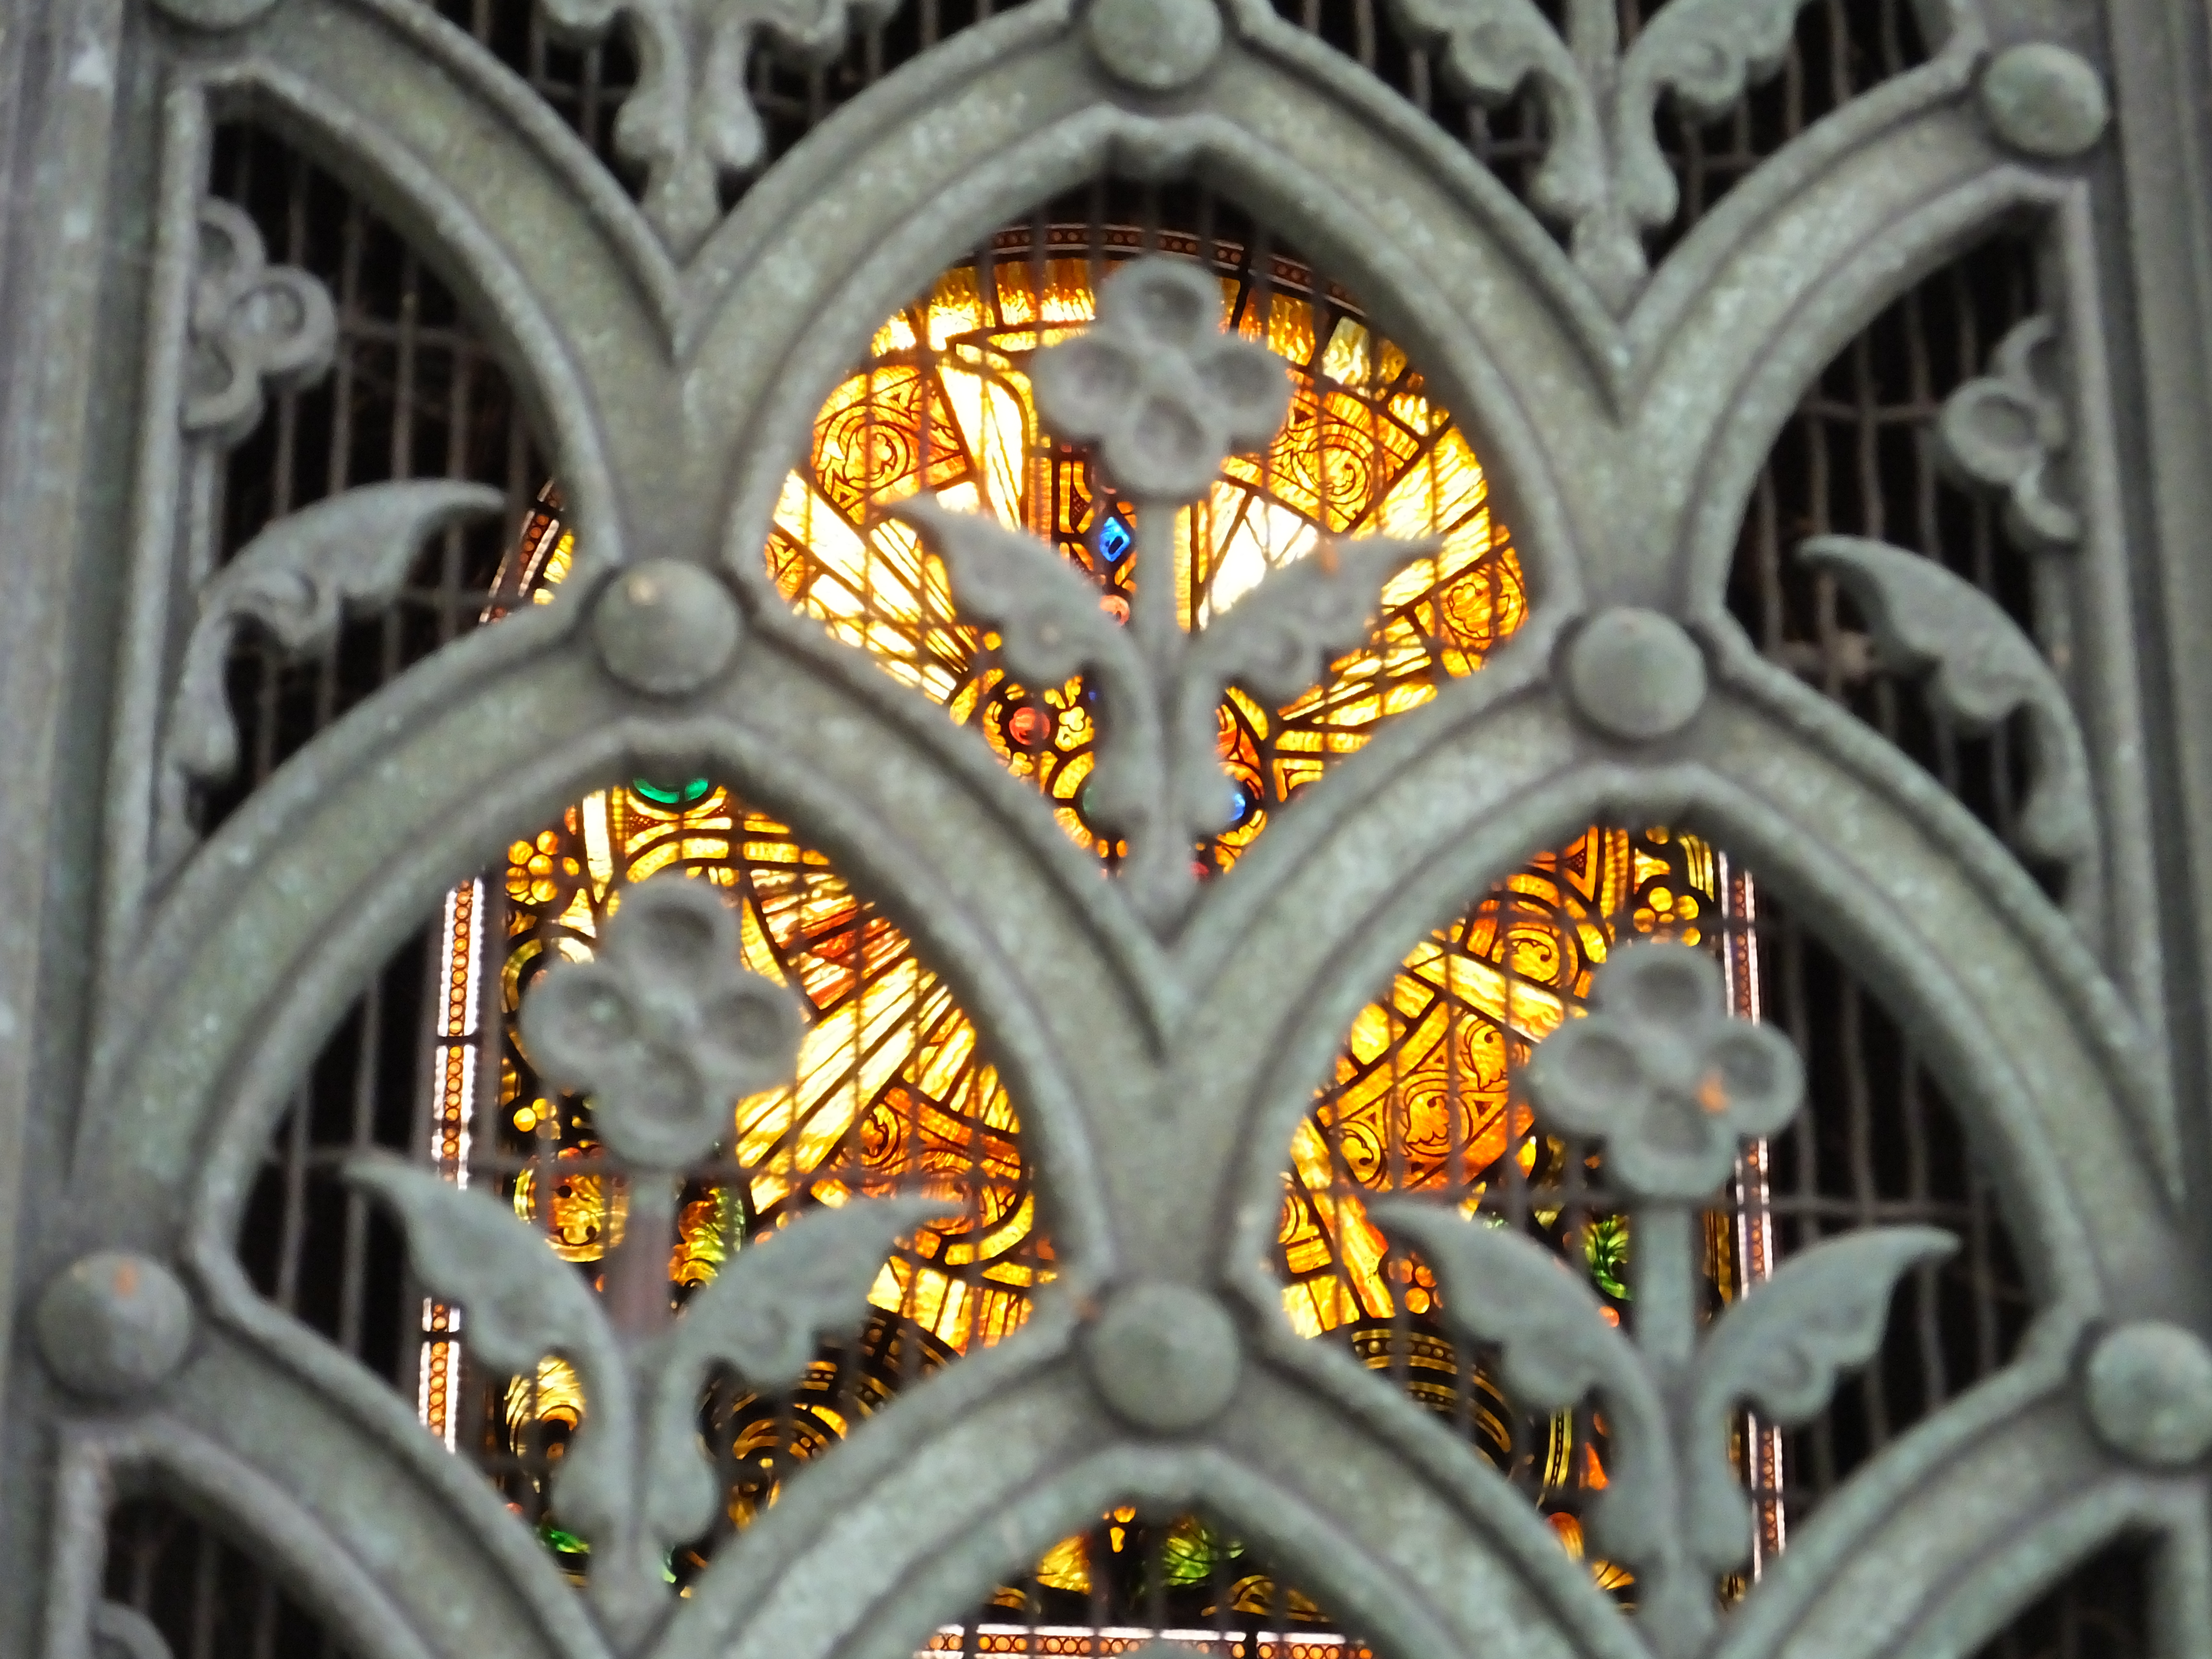 One of many examples of beautiful stained glass